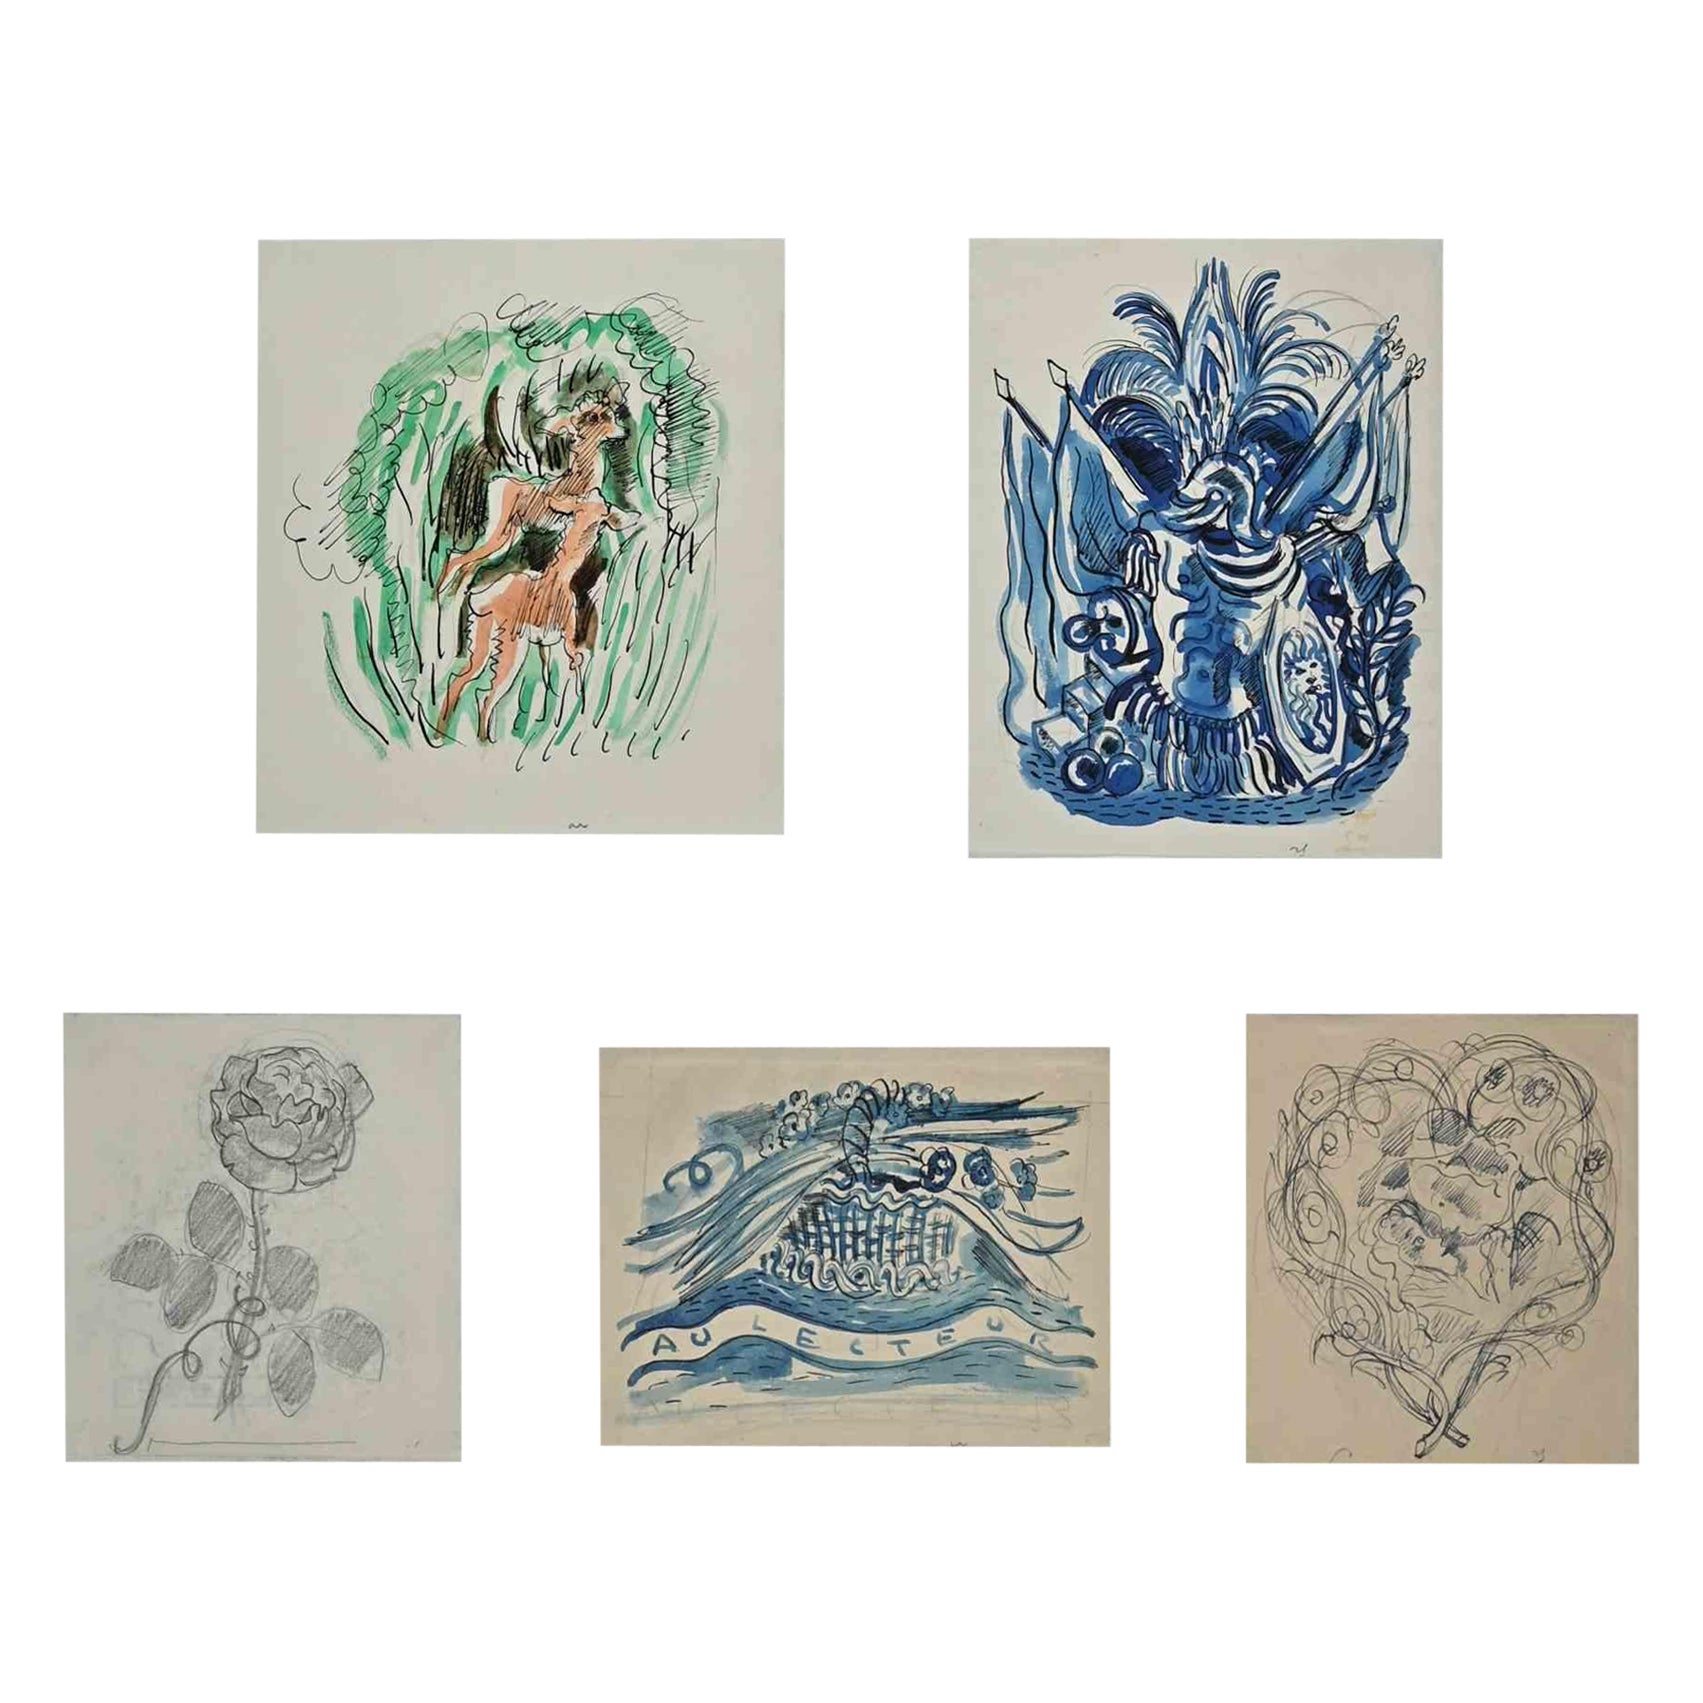 Compositions is an Ink and Watercolor Drawing realized by Jean Gabriel Daragnès (1886-1950).

Good condition of 5 little artwork included a grey cardboard passpartout.

Signed on plate, on the lower right corner.

Jean-Gabriel Daragnès  is a French